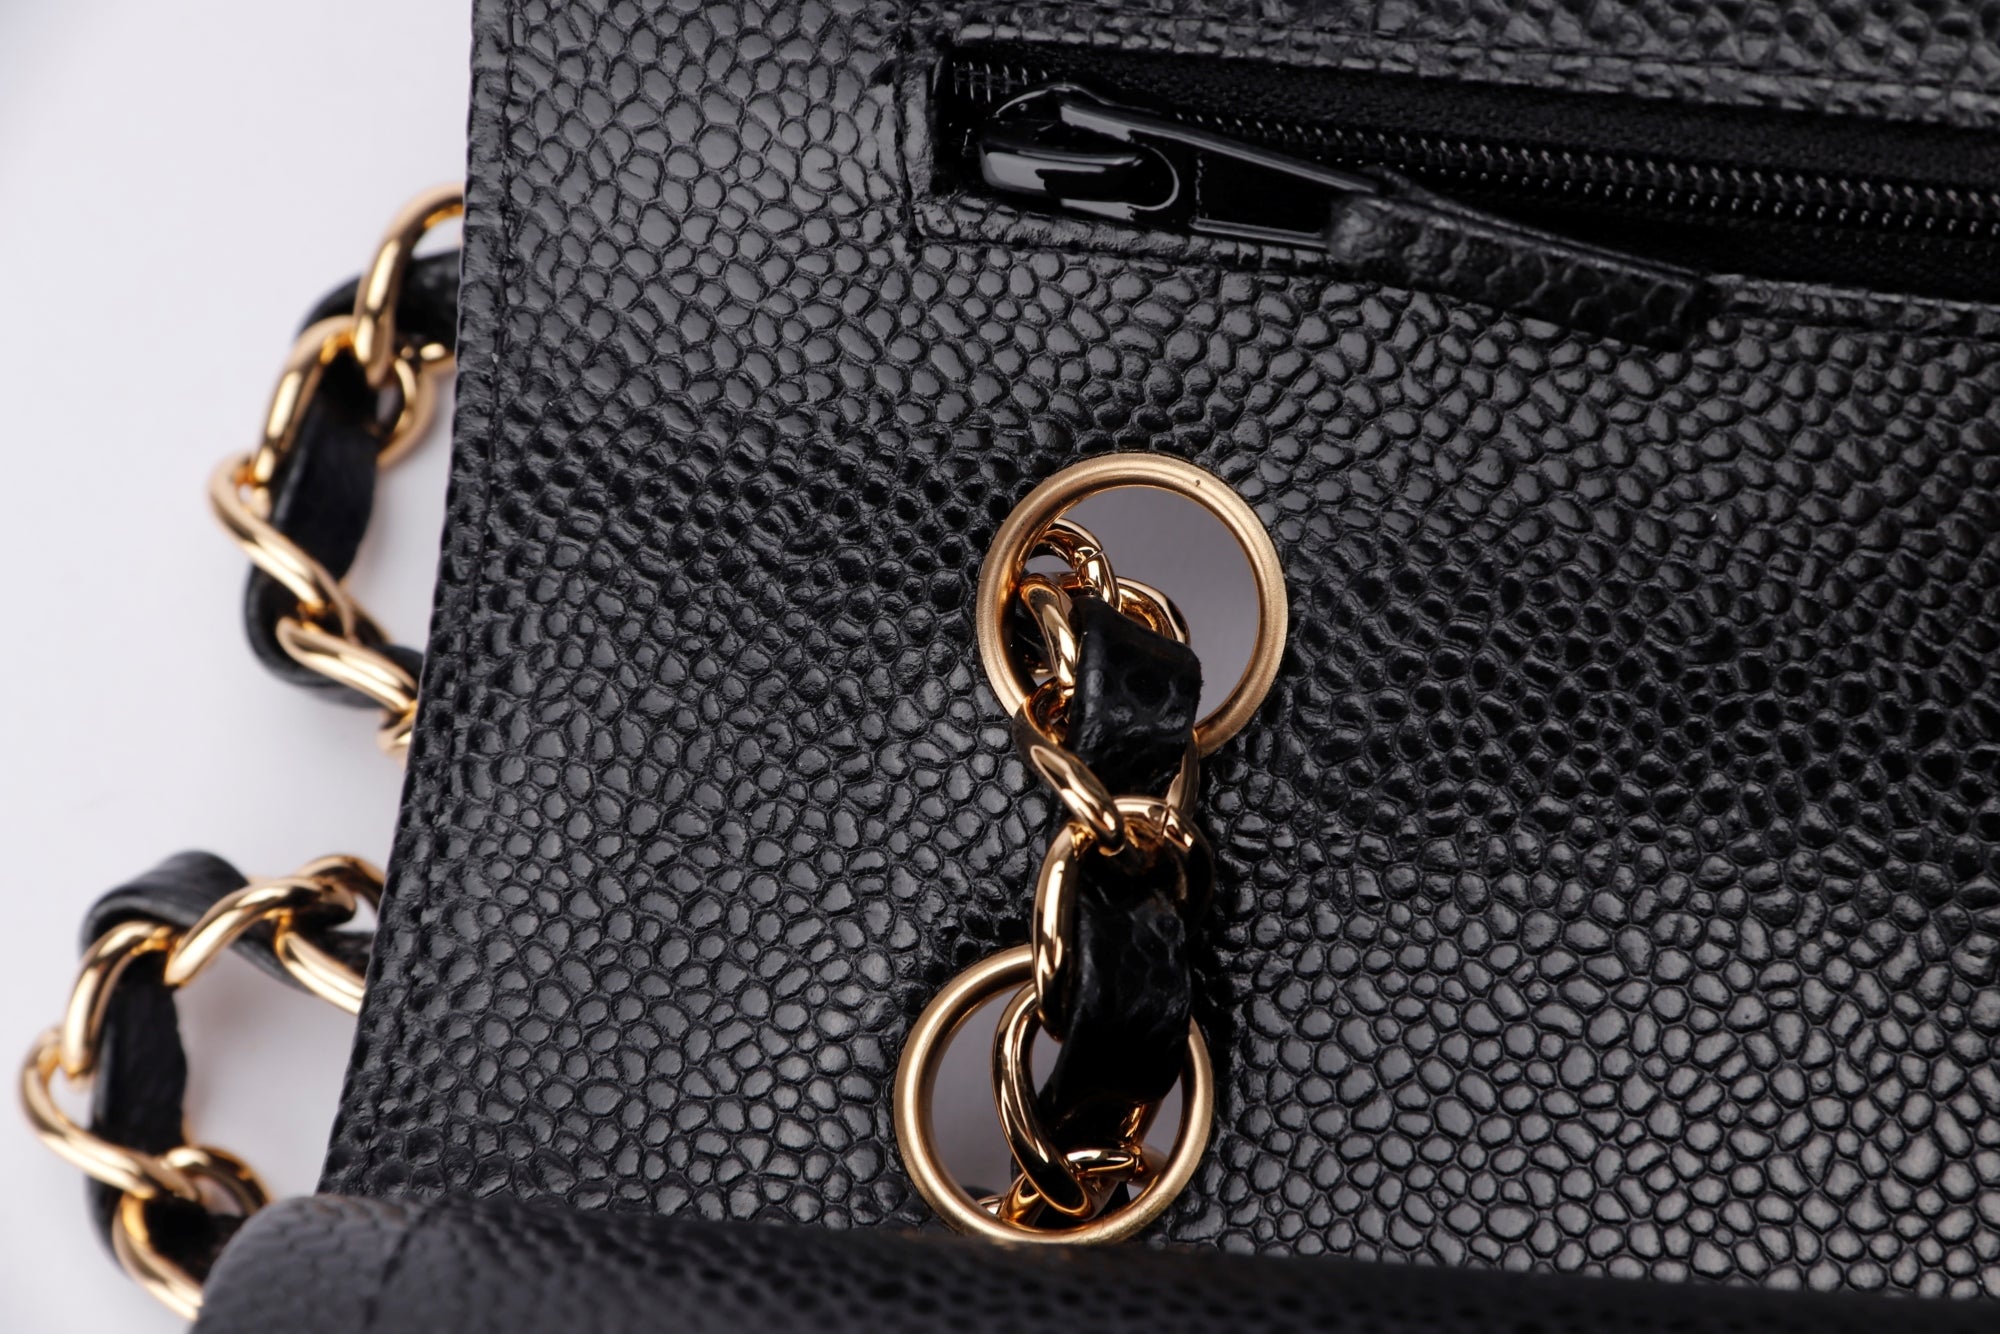 Chanel Classic Flap (KT42xxxx) Medium Size Black Caviar Leather Gold Hardware, with Dust Cover & Box